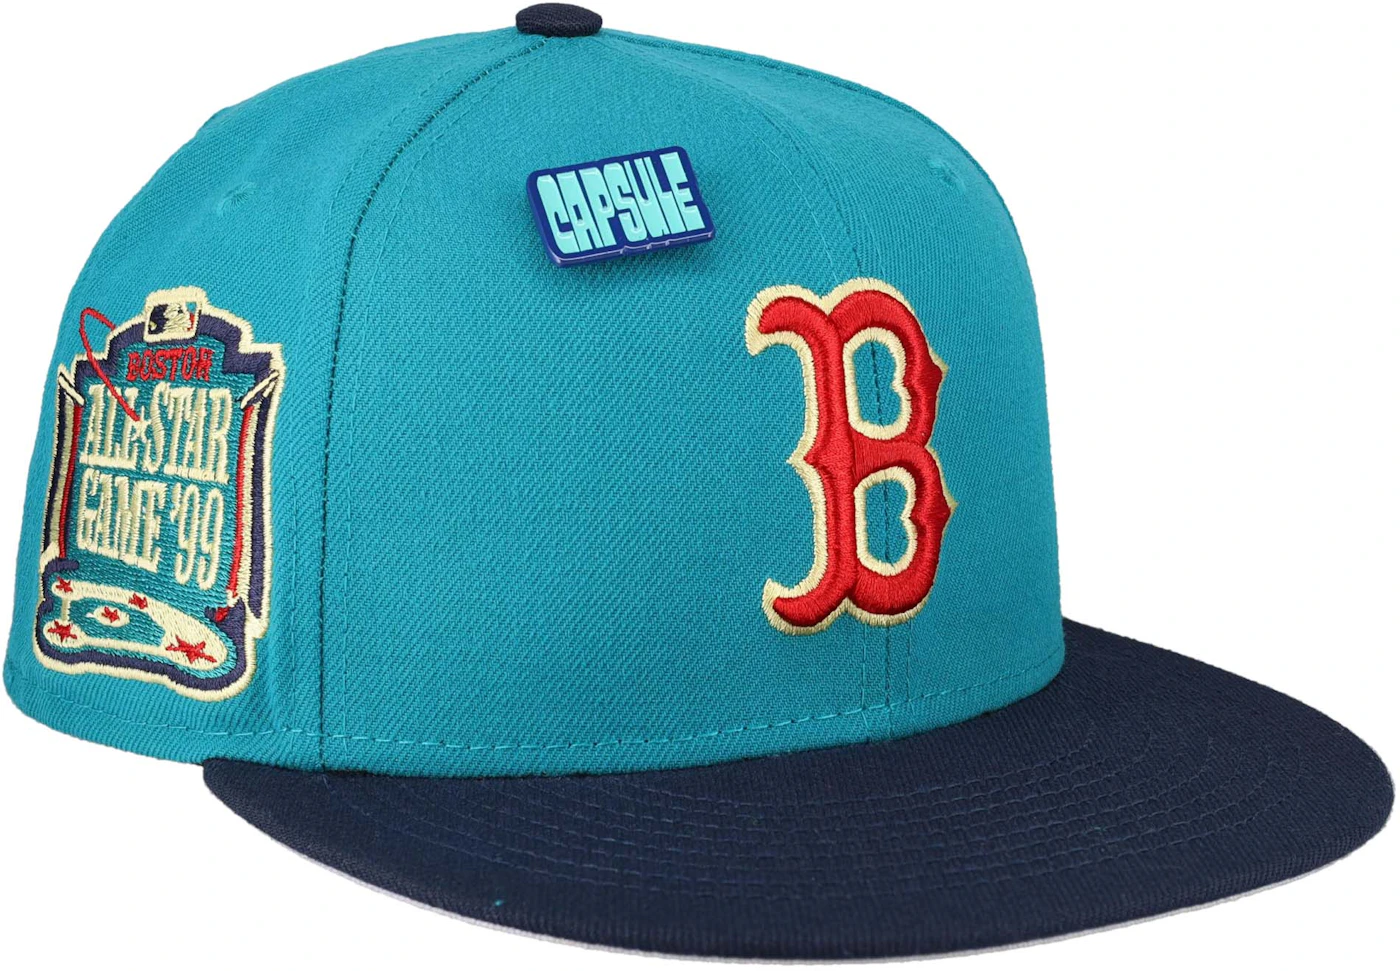 New Era Boston Red Sox Capsule Teal Collection 1999 All Star Game